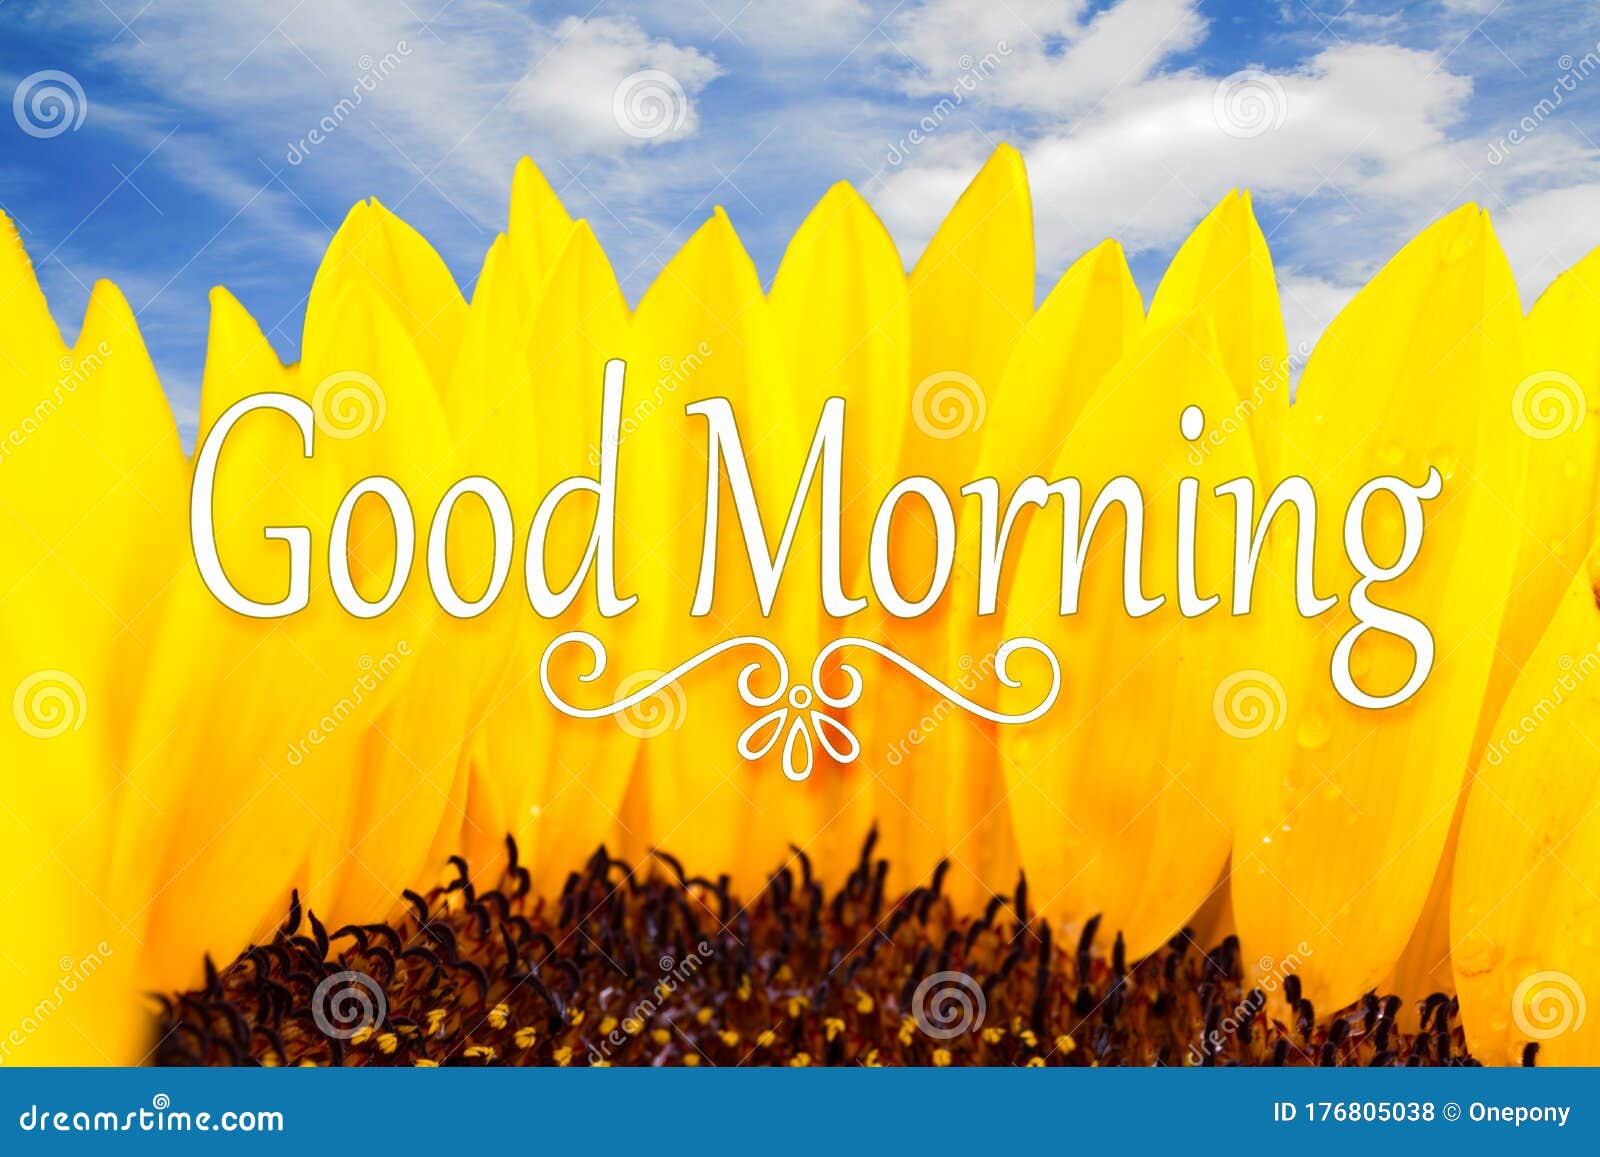 Good Morning Inspirational Quote Stock Photo - Image of sunflower ...